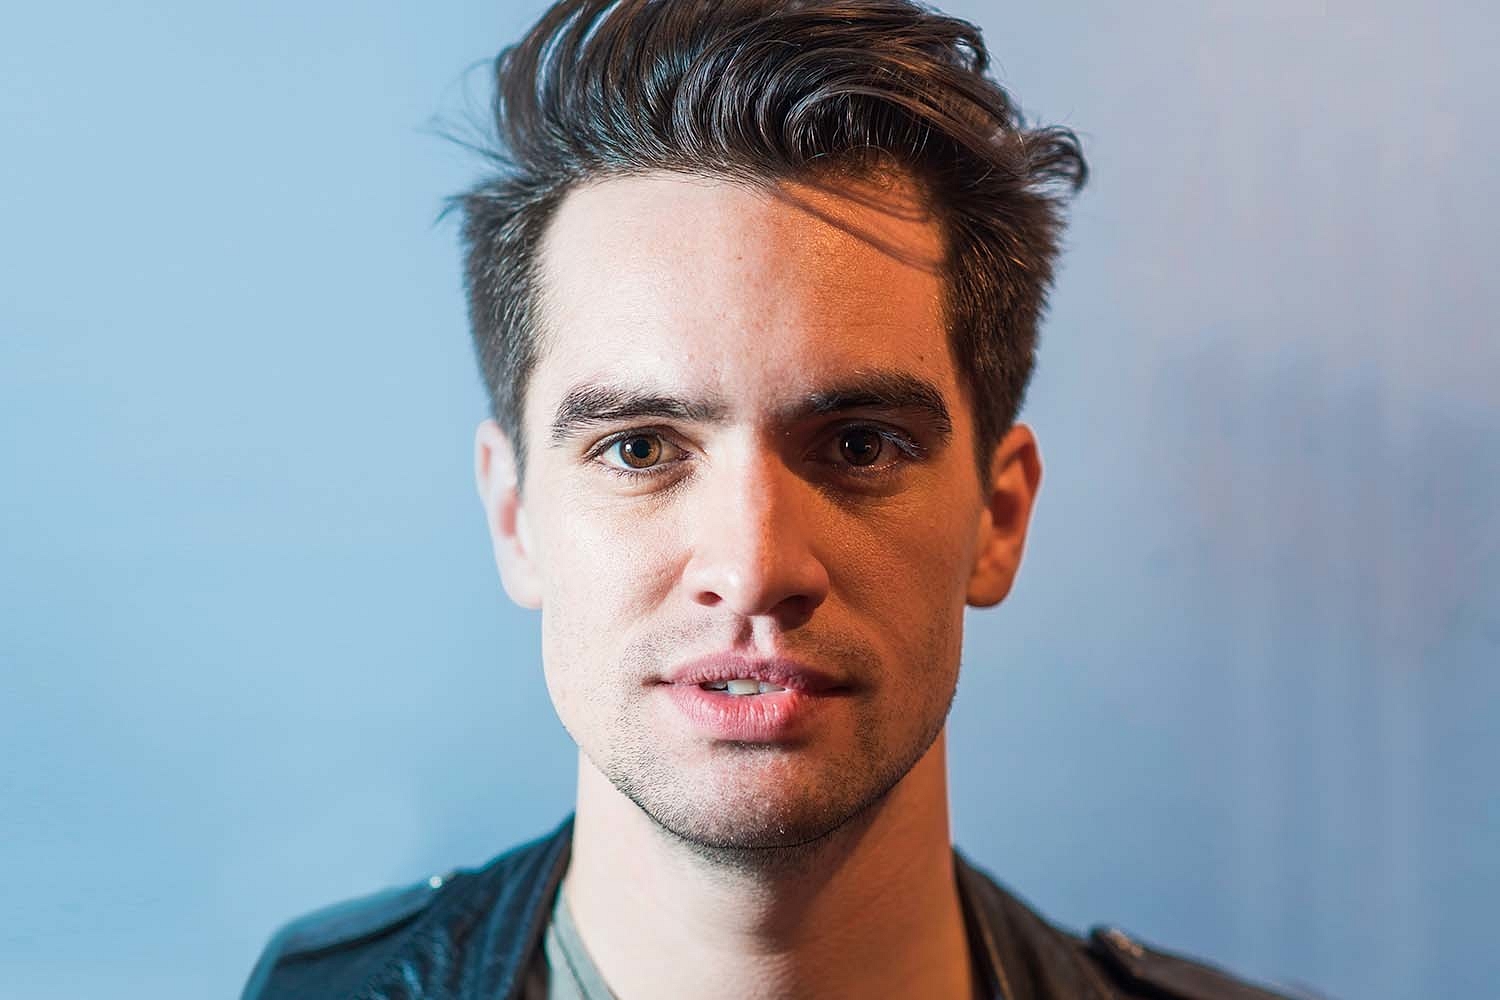 Panic! At The Disco cover The Weeknd’s ‘Starboy’